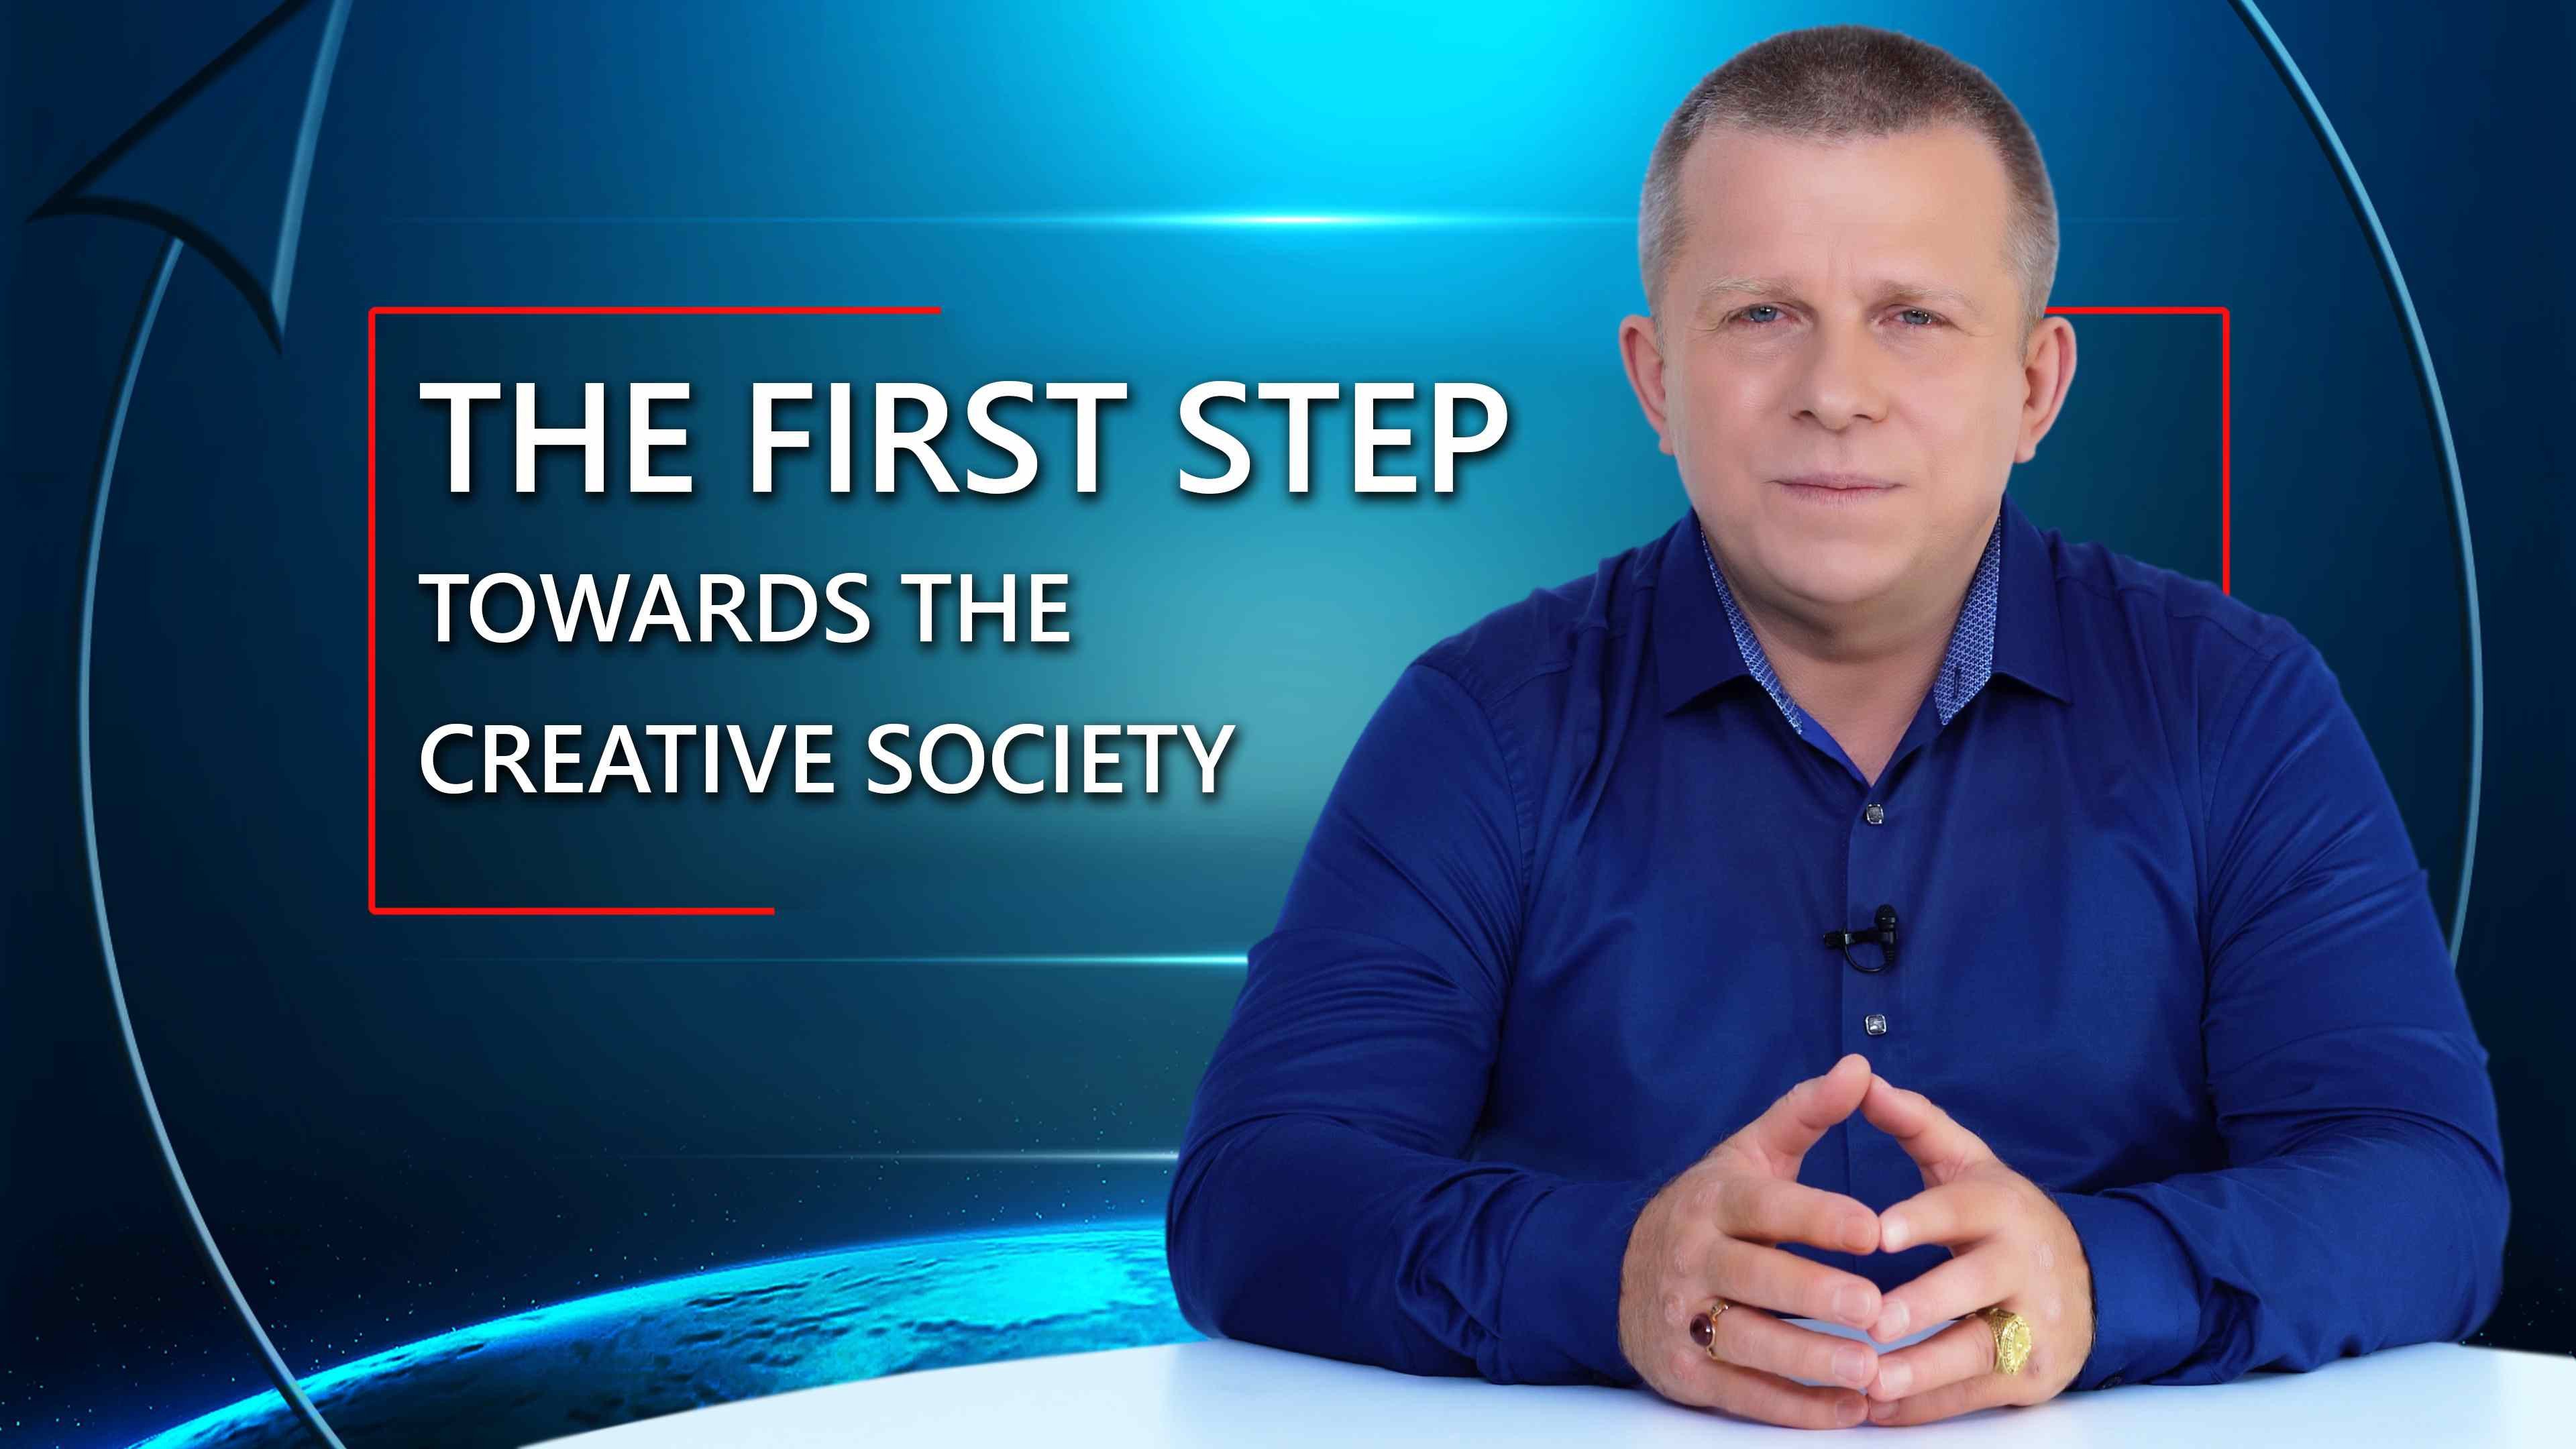 The First Step Towards the Creative Society